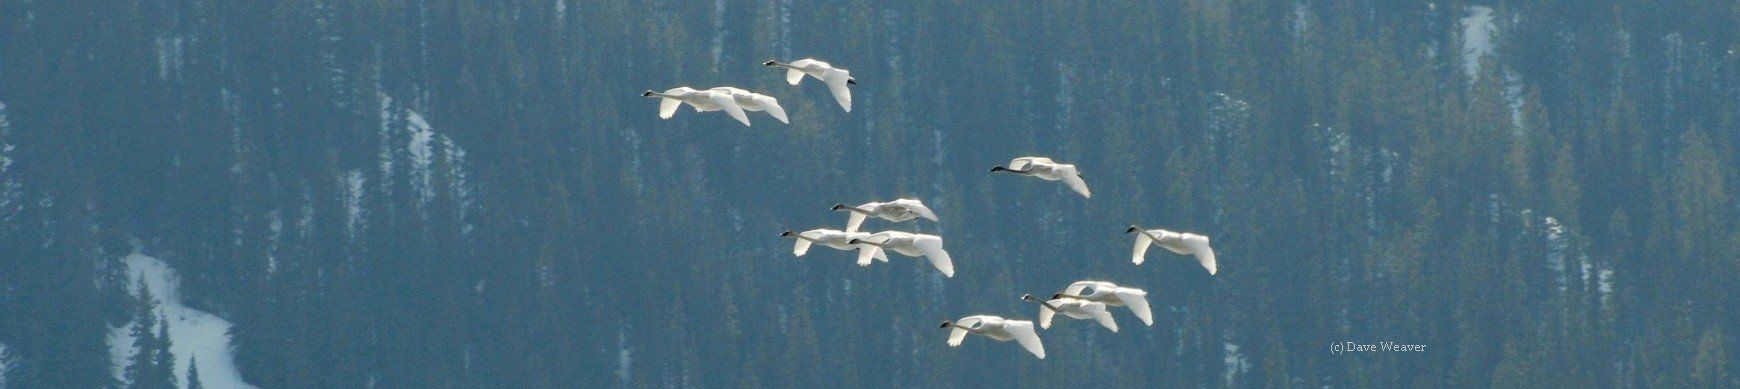 The Trumpeter Swan Society has links to information about Canadian Trumpeter Swans